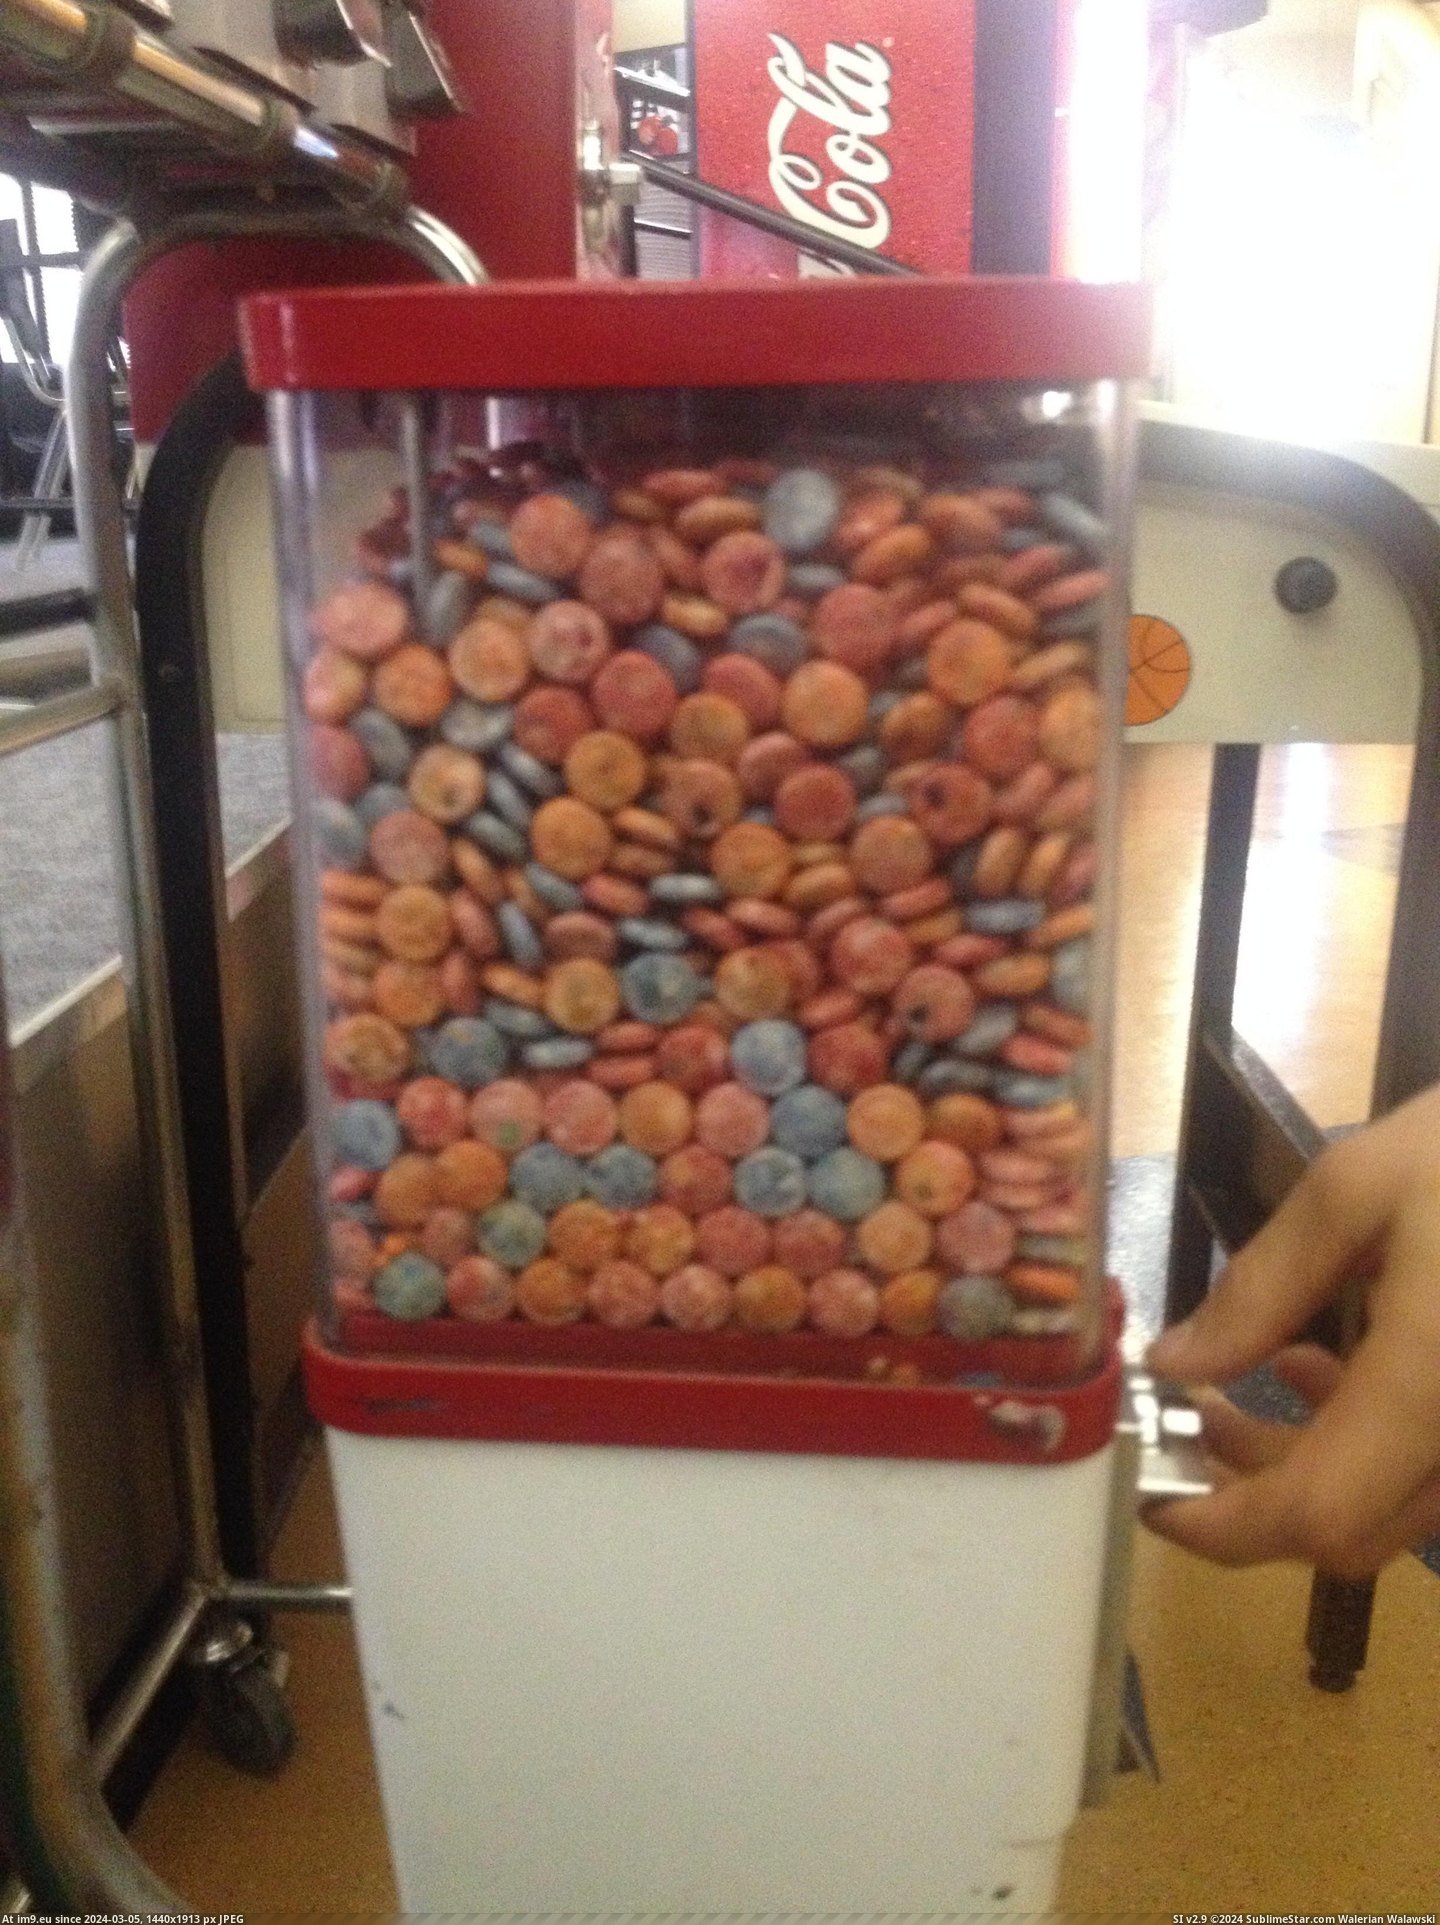 #Candy #Wall #Dispenser #Hexagonal #Formed #Formation [Mildlyinteresting] Candy formed hexagonal formation against the wall of the dispenser. Pic. (Image of album My r/MILDLYINTERESTING favs))